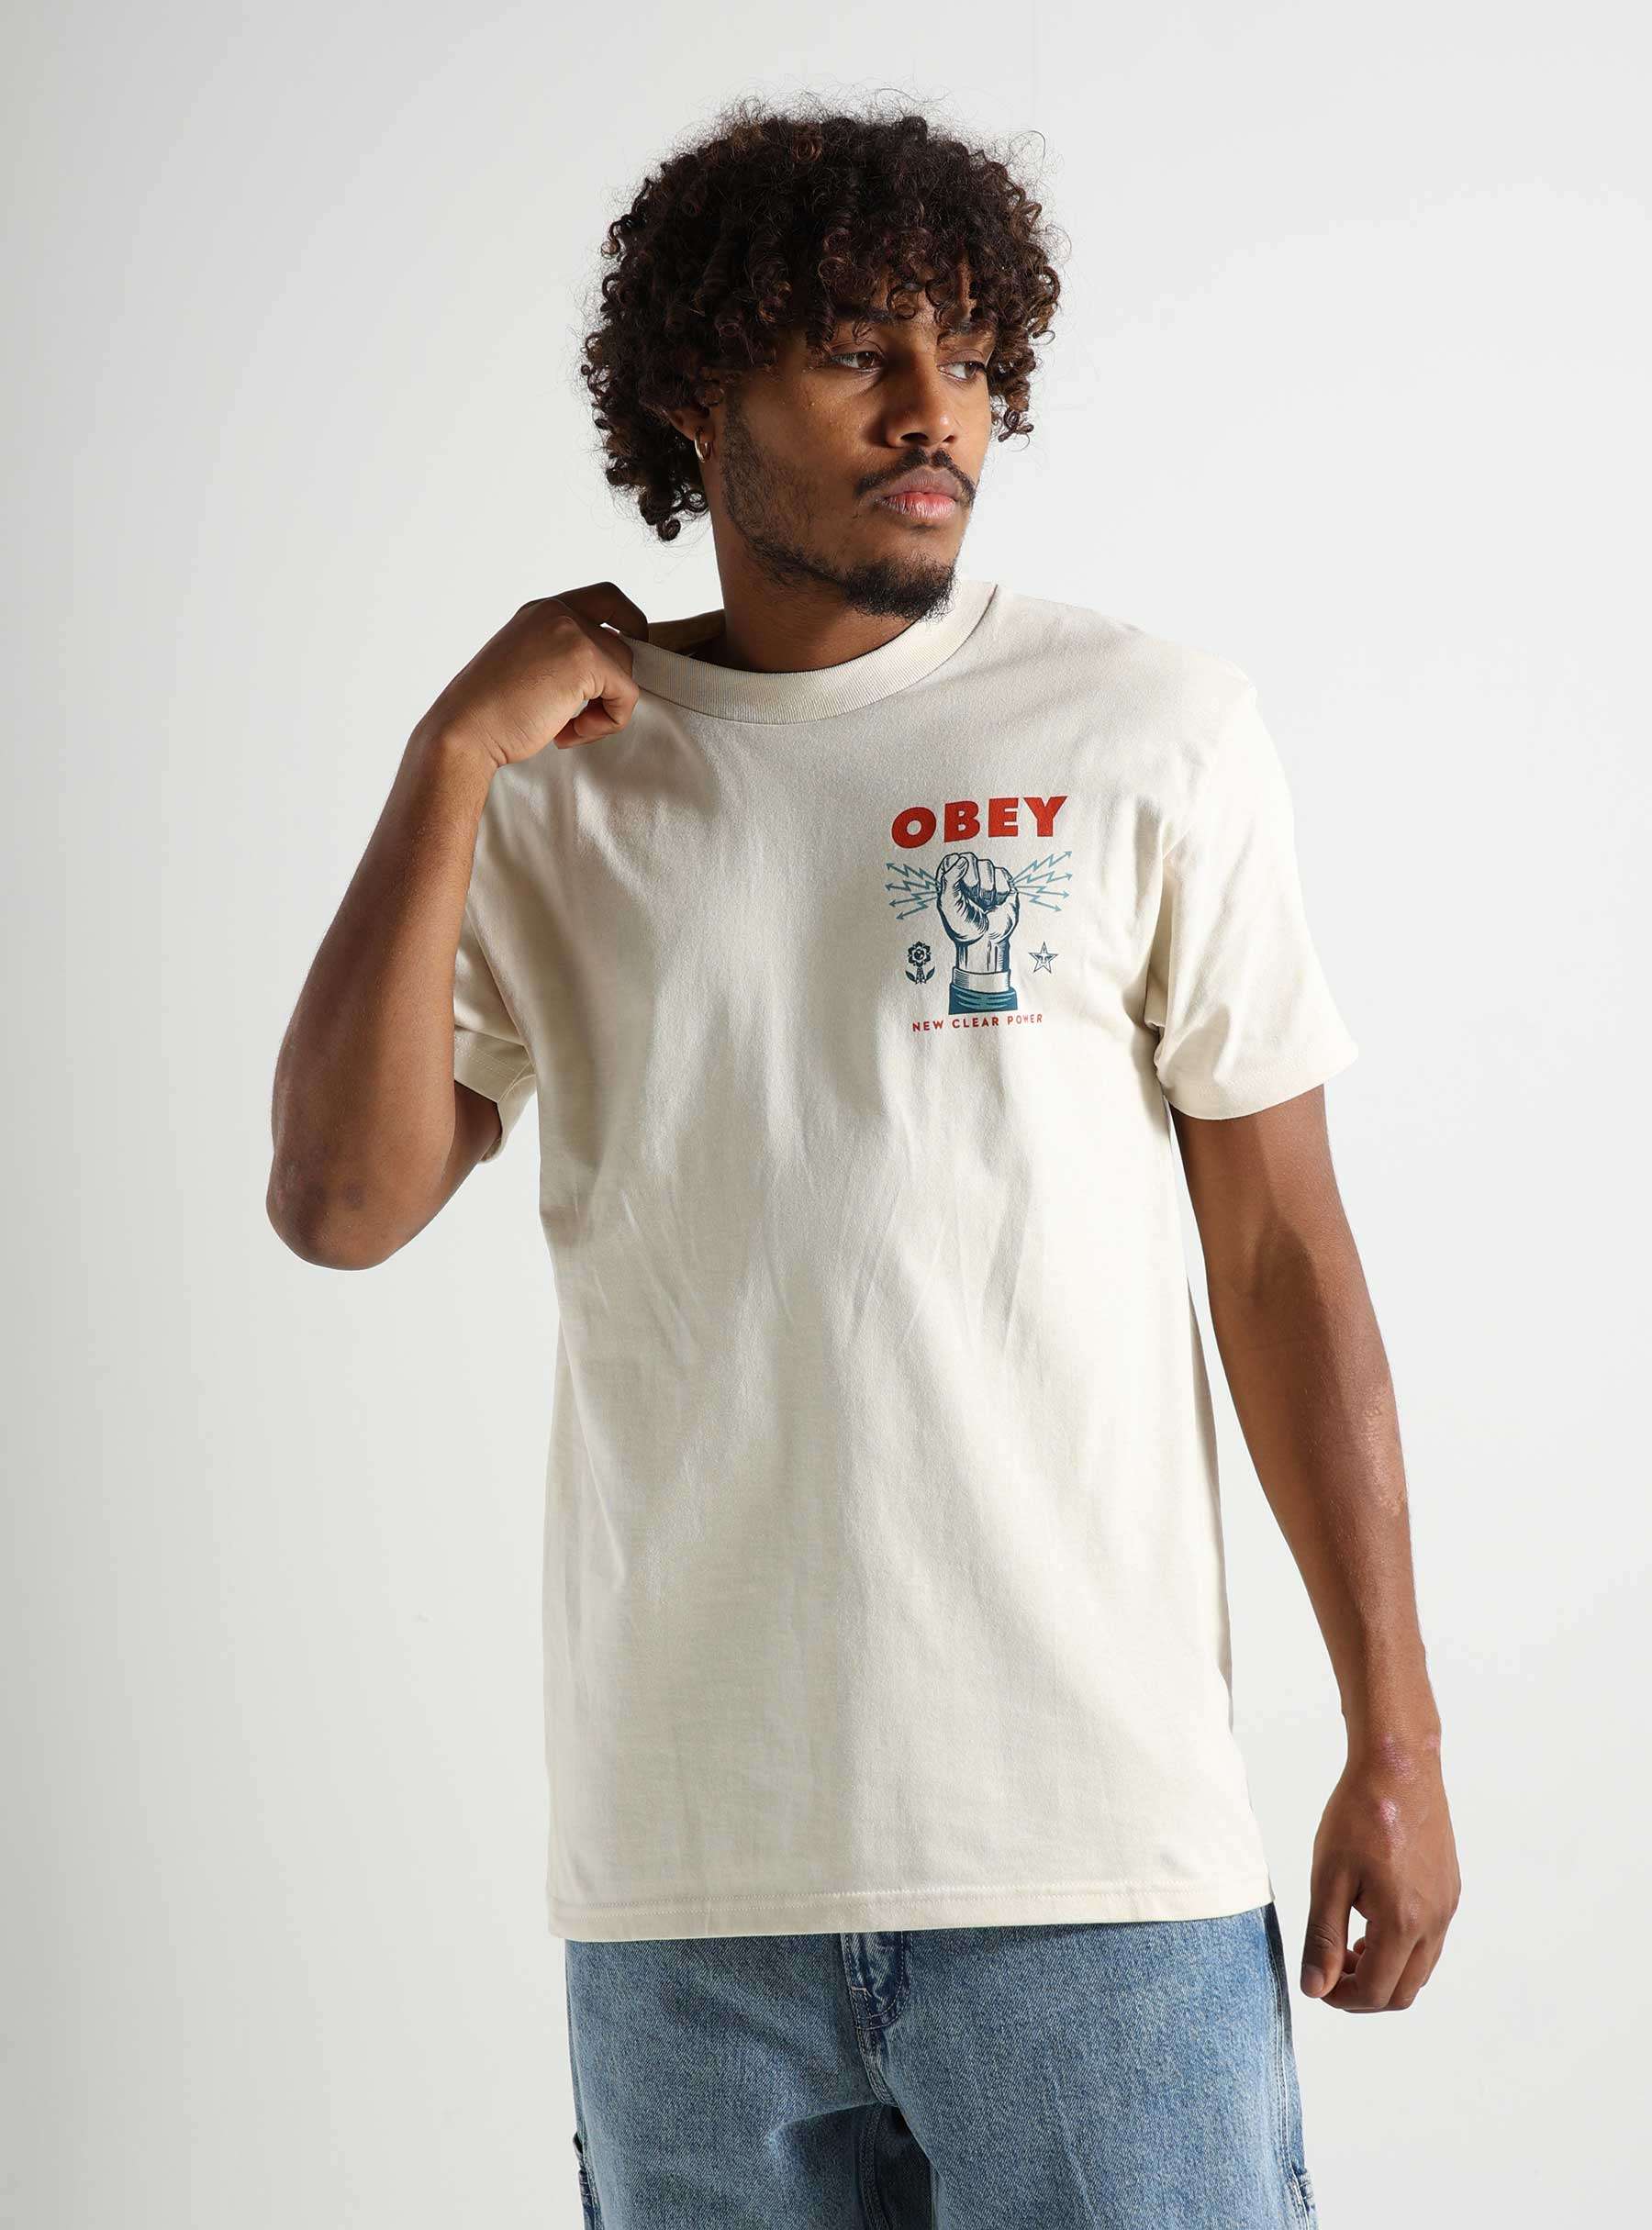 Obey New Clear Power T-shirt Cream 165263779-CRM